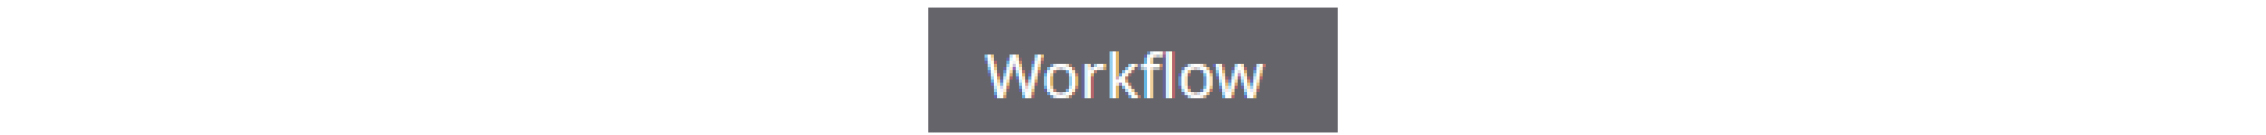 Click on workflow on the top banner.